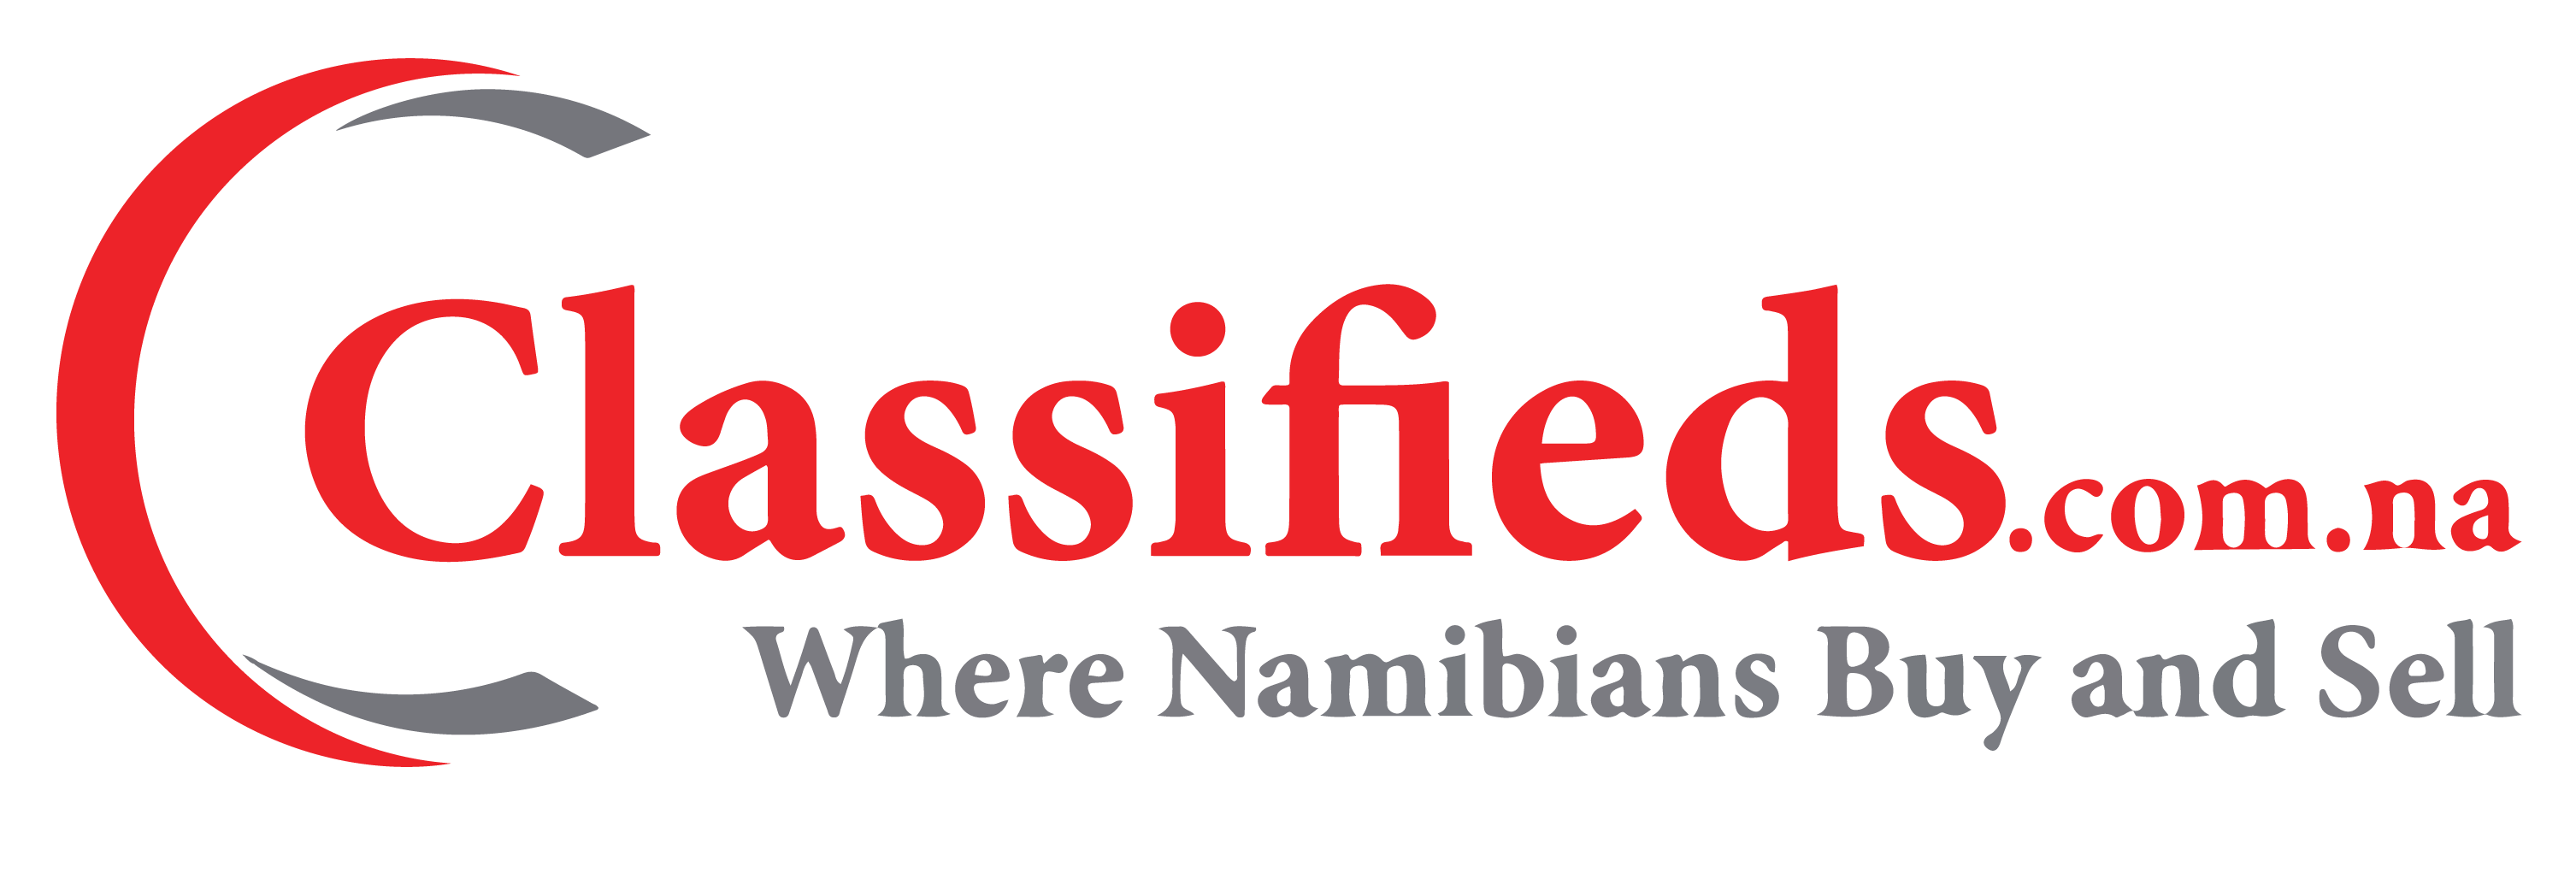 Classified Logo - Classifieds.com.na - Where Namibians Buy and Sell